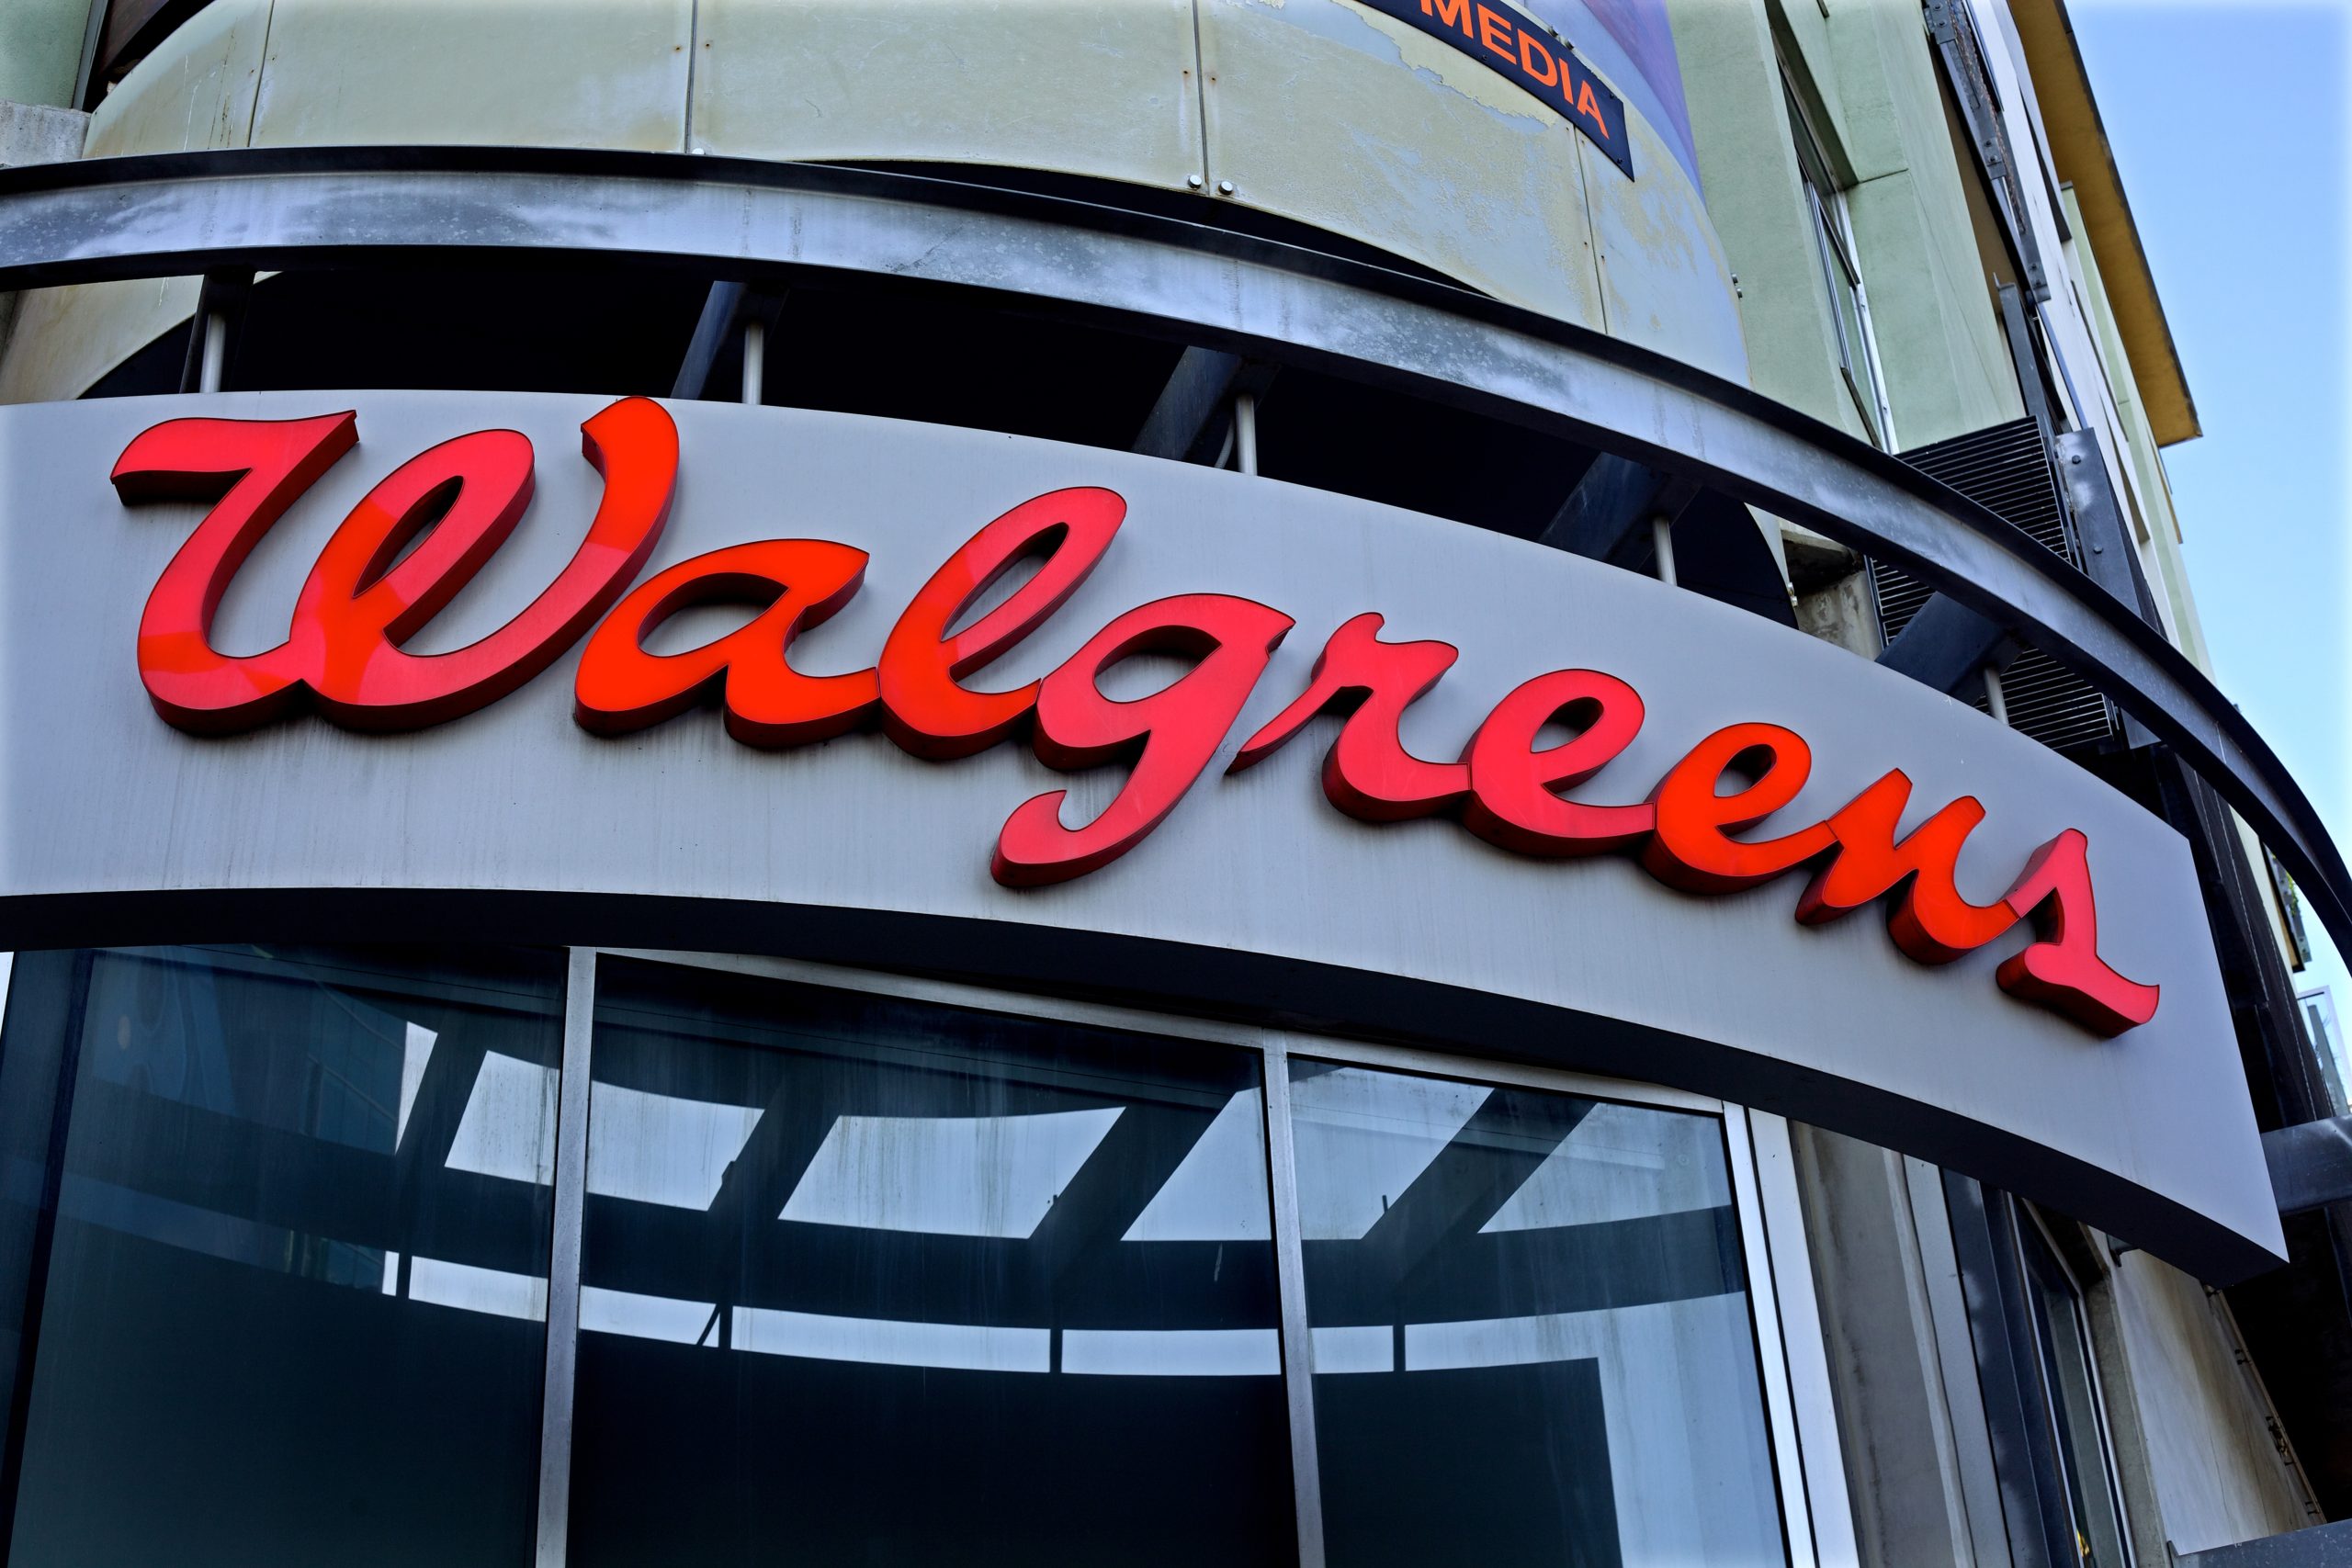 Walgreens CMO Departs After Two Years